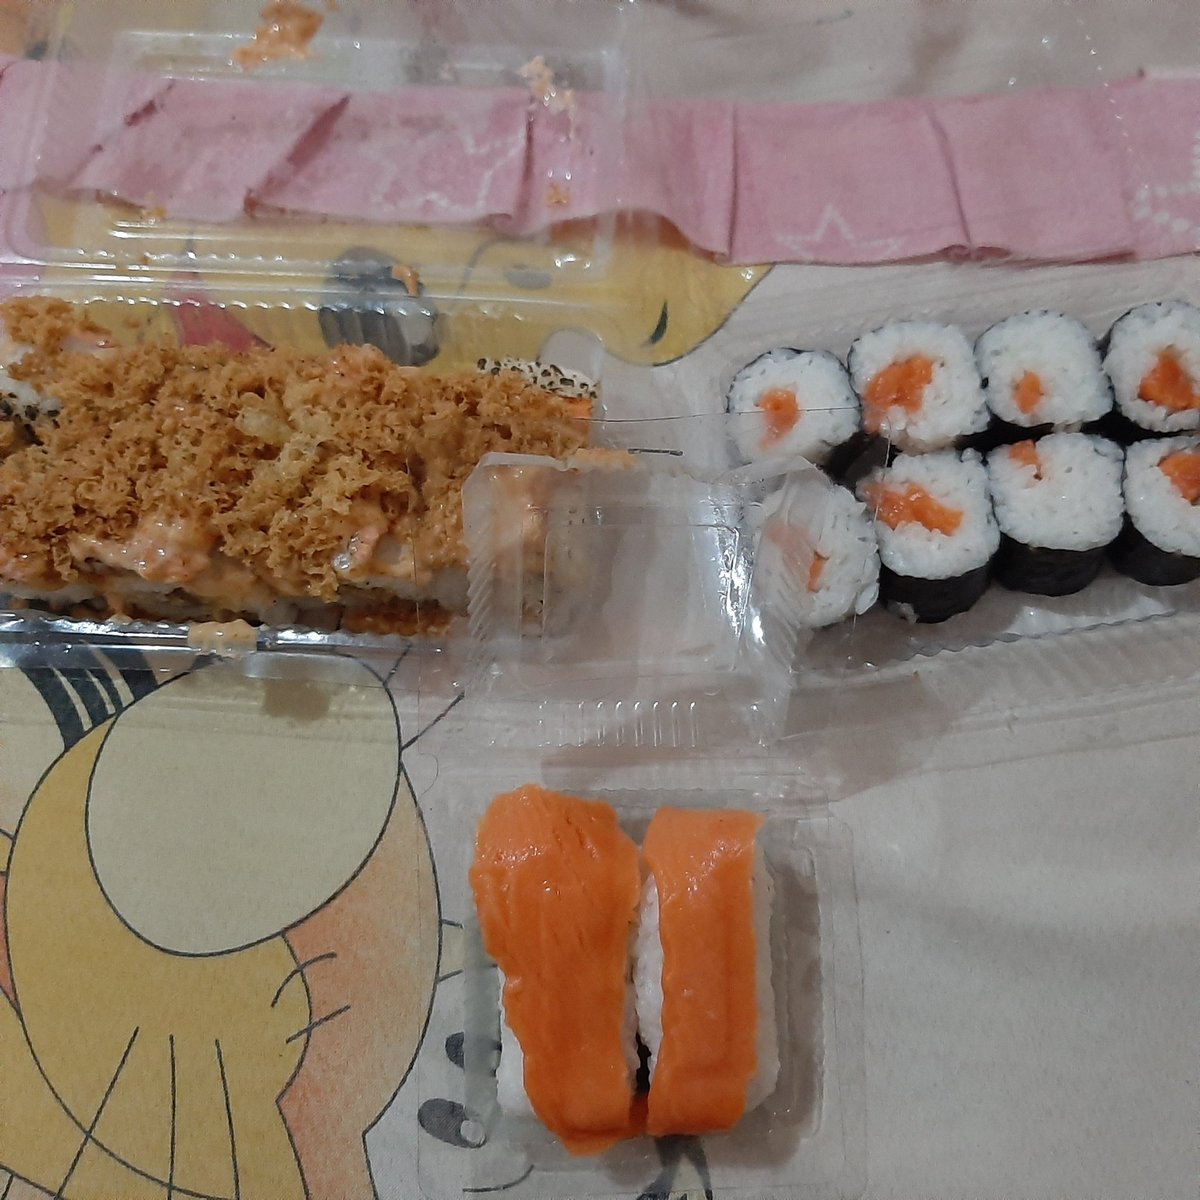 DAY #25 ㅡ 18/05 06:15 PMSUSHI FOR A BETTER LIFE